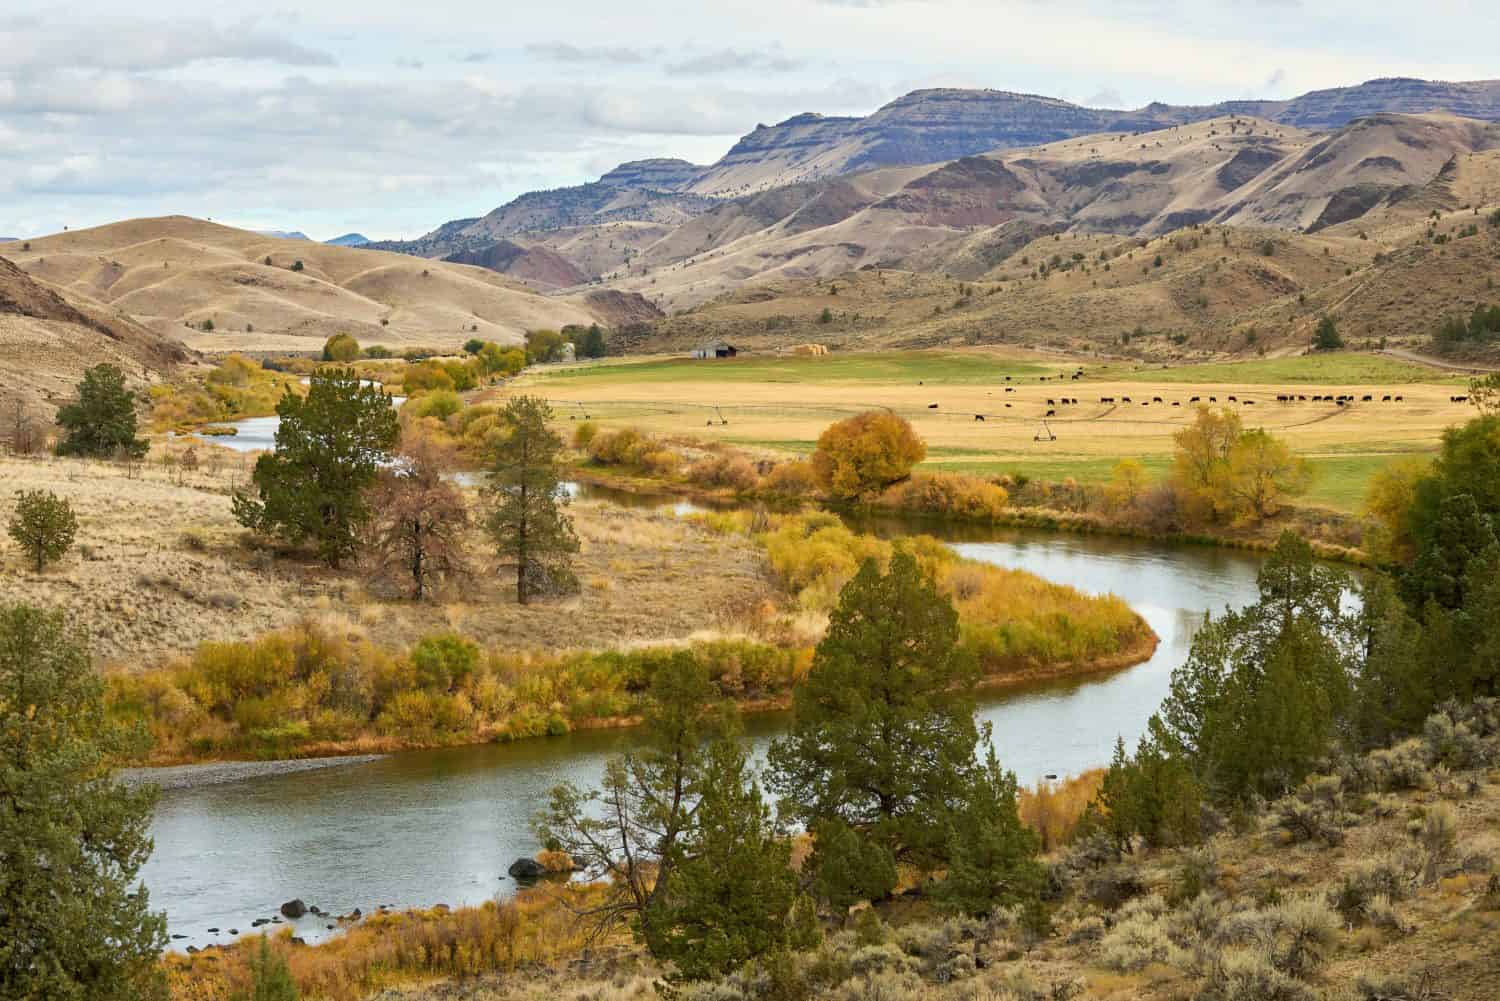 John Day River among the mountain ladscape of Eastern Oregon.